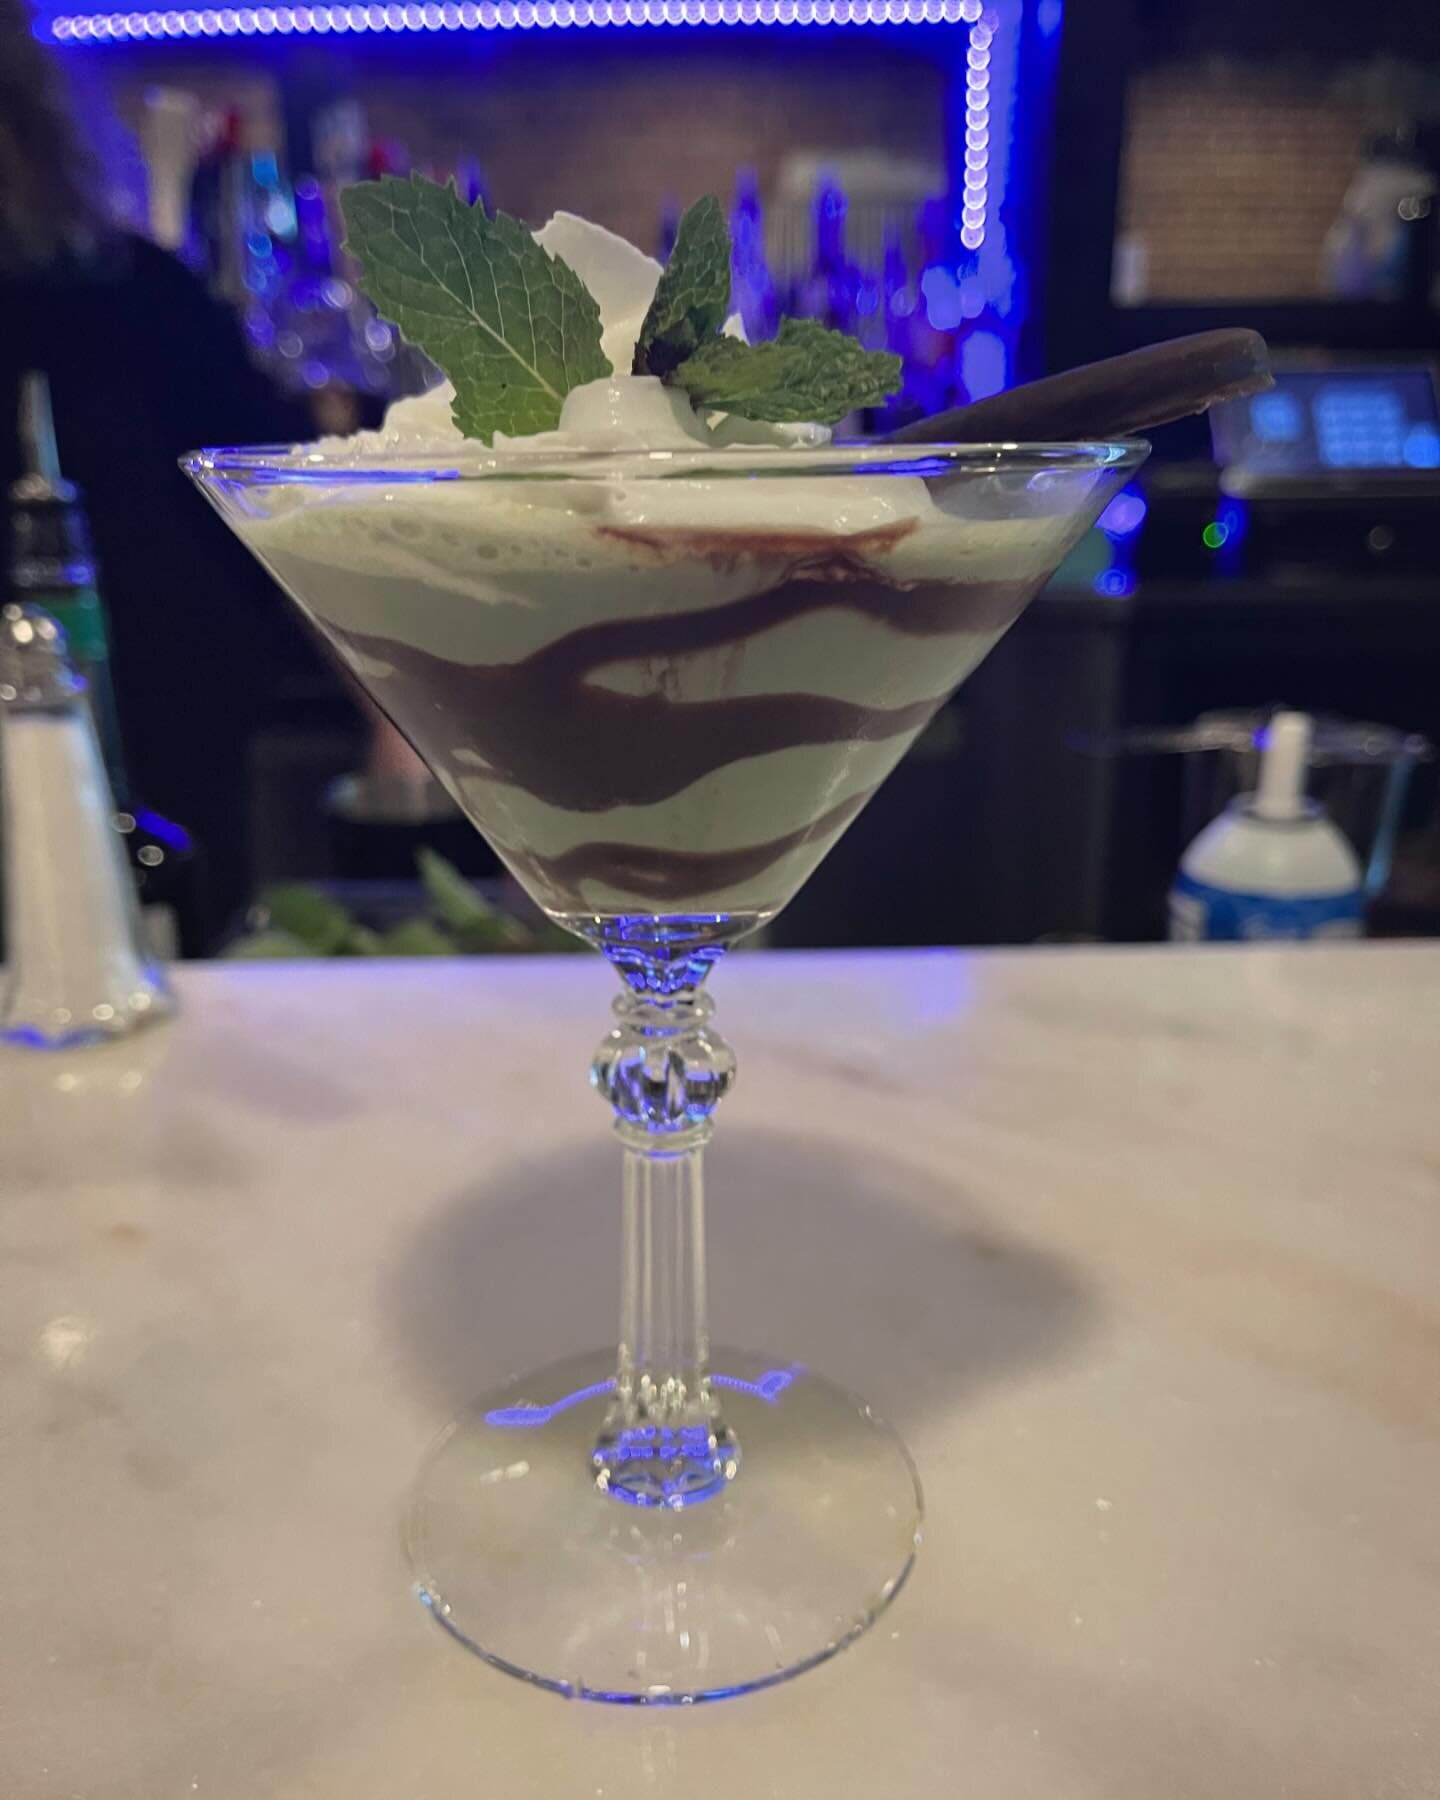 Come try a Thin Mint Martini and enjoy some free, live music from Eric Woods after Wine Down! #thebuzzardsroostms